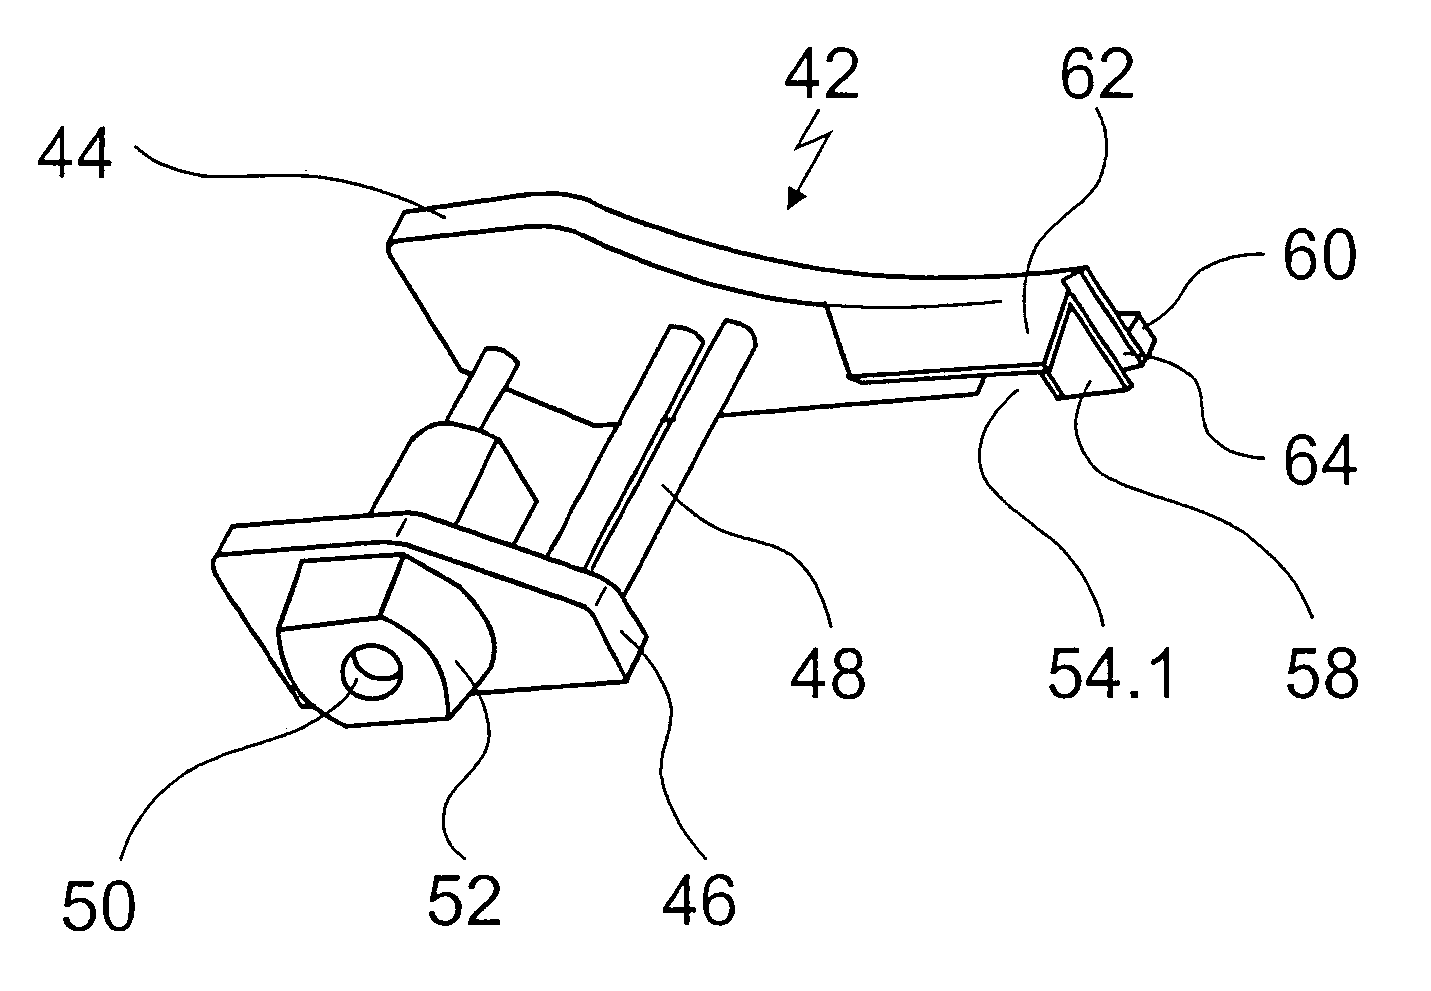 Bearing arrangement for vibrationally mounting a grinding disk in a grinder